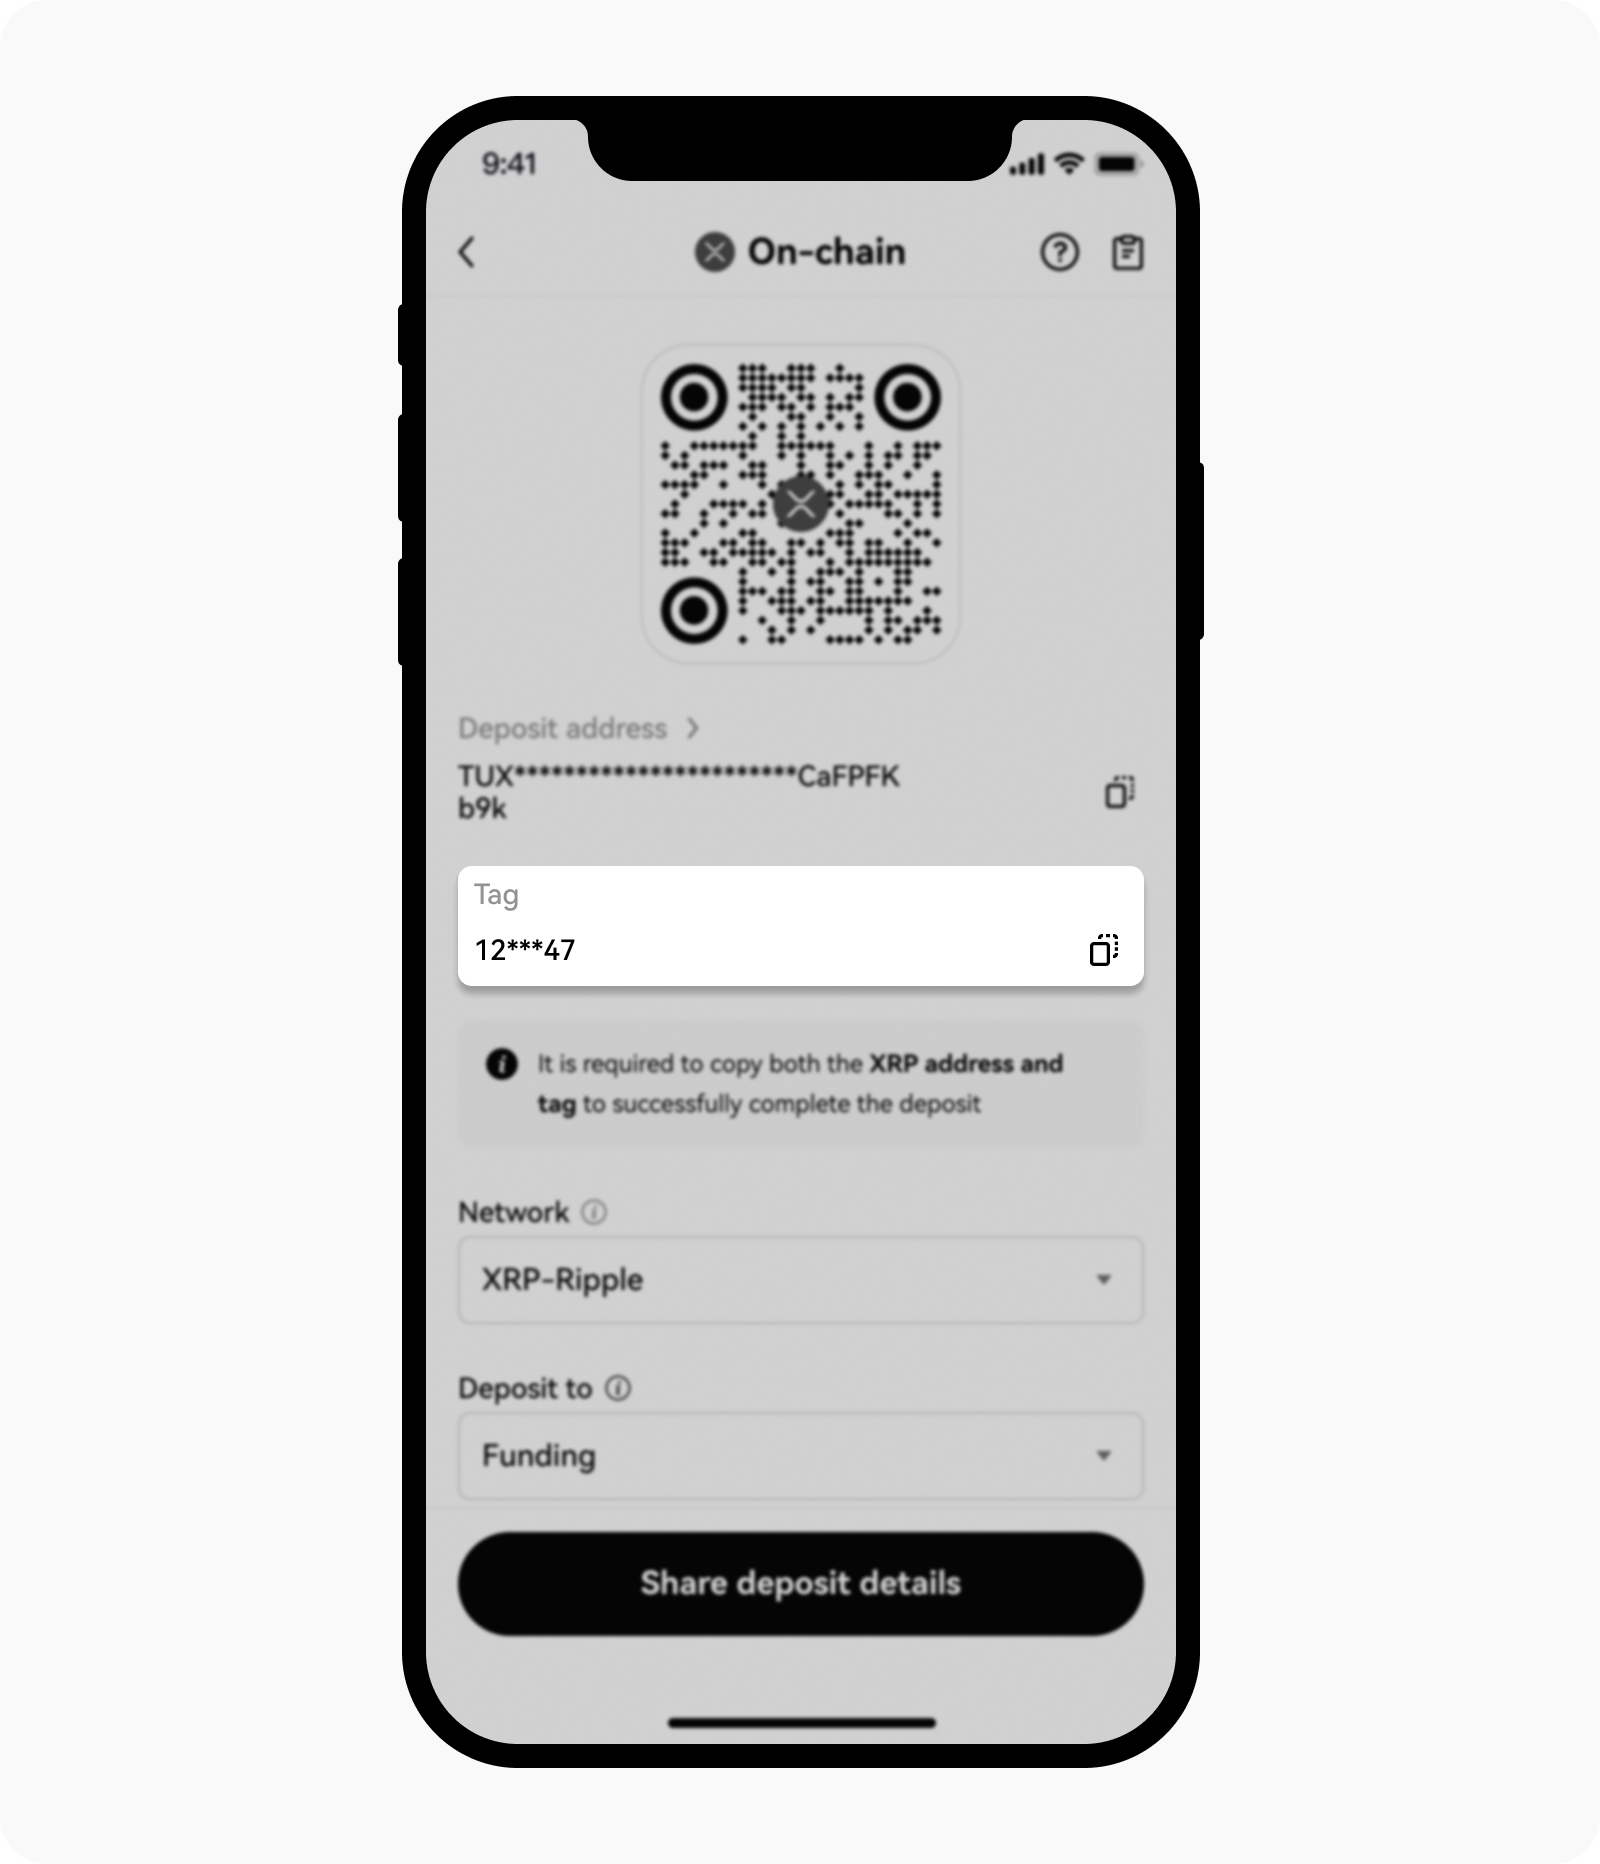 CT-app-deposit on chain view tag memo